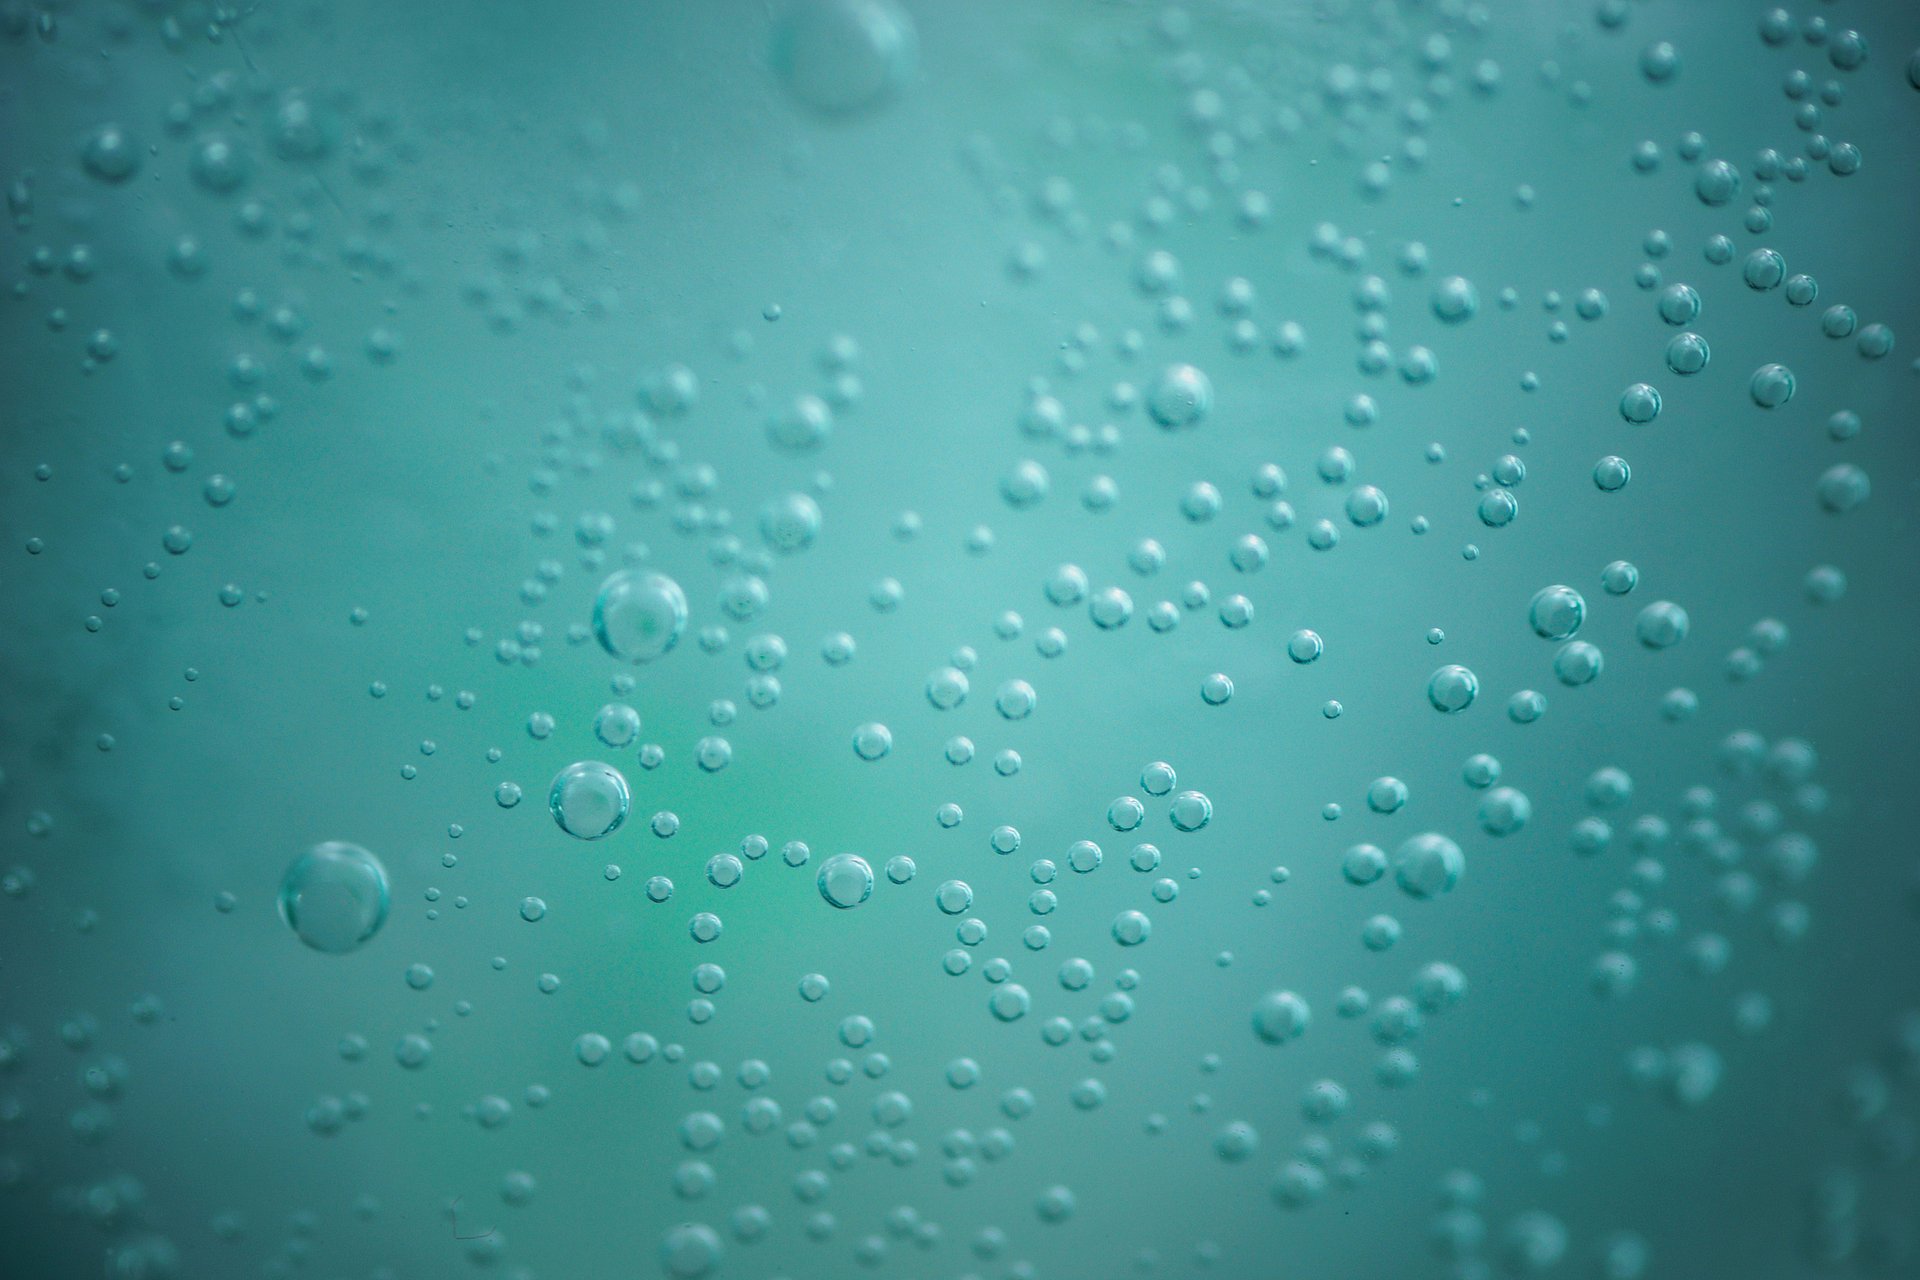 The picture shows air bubbles in water.